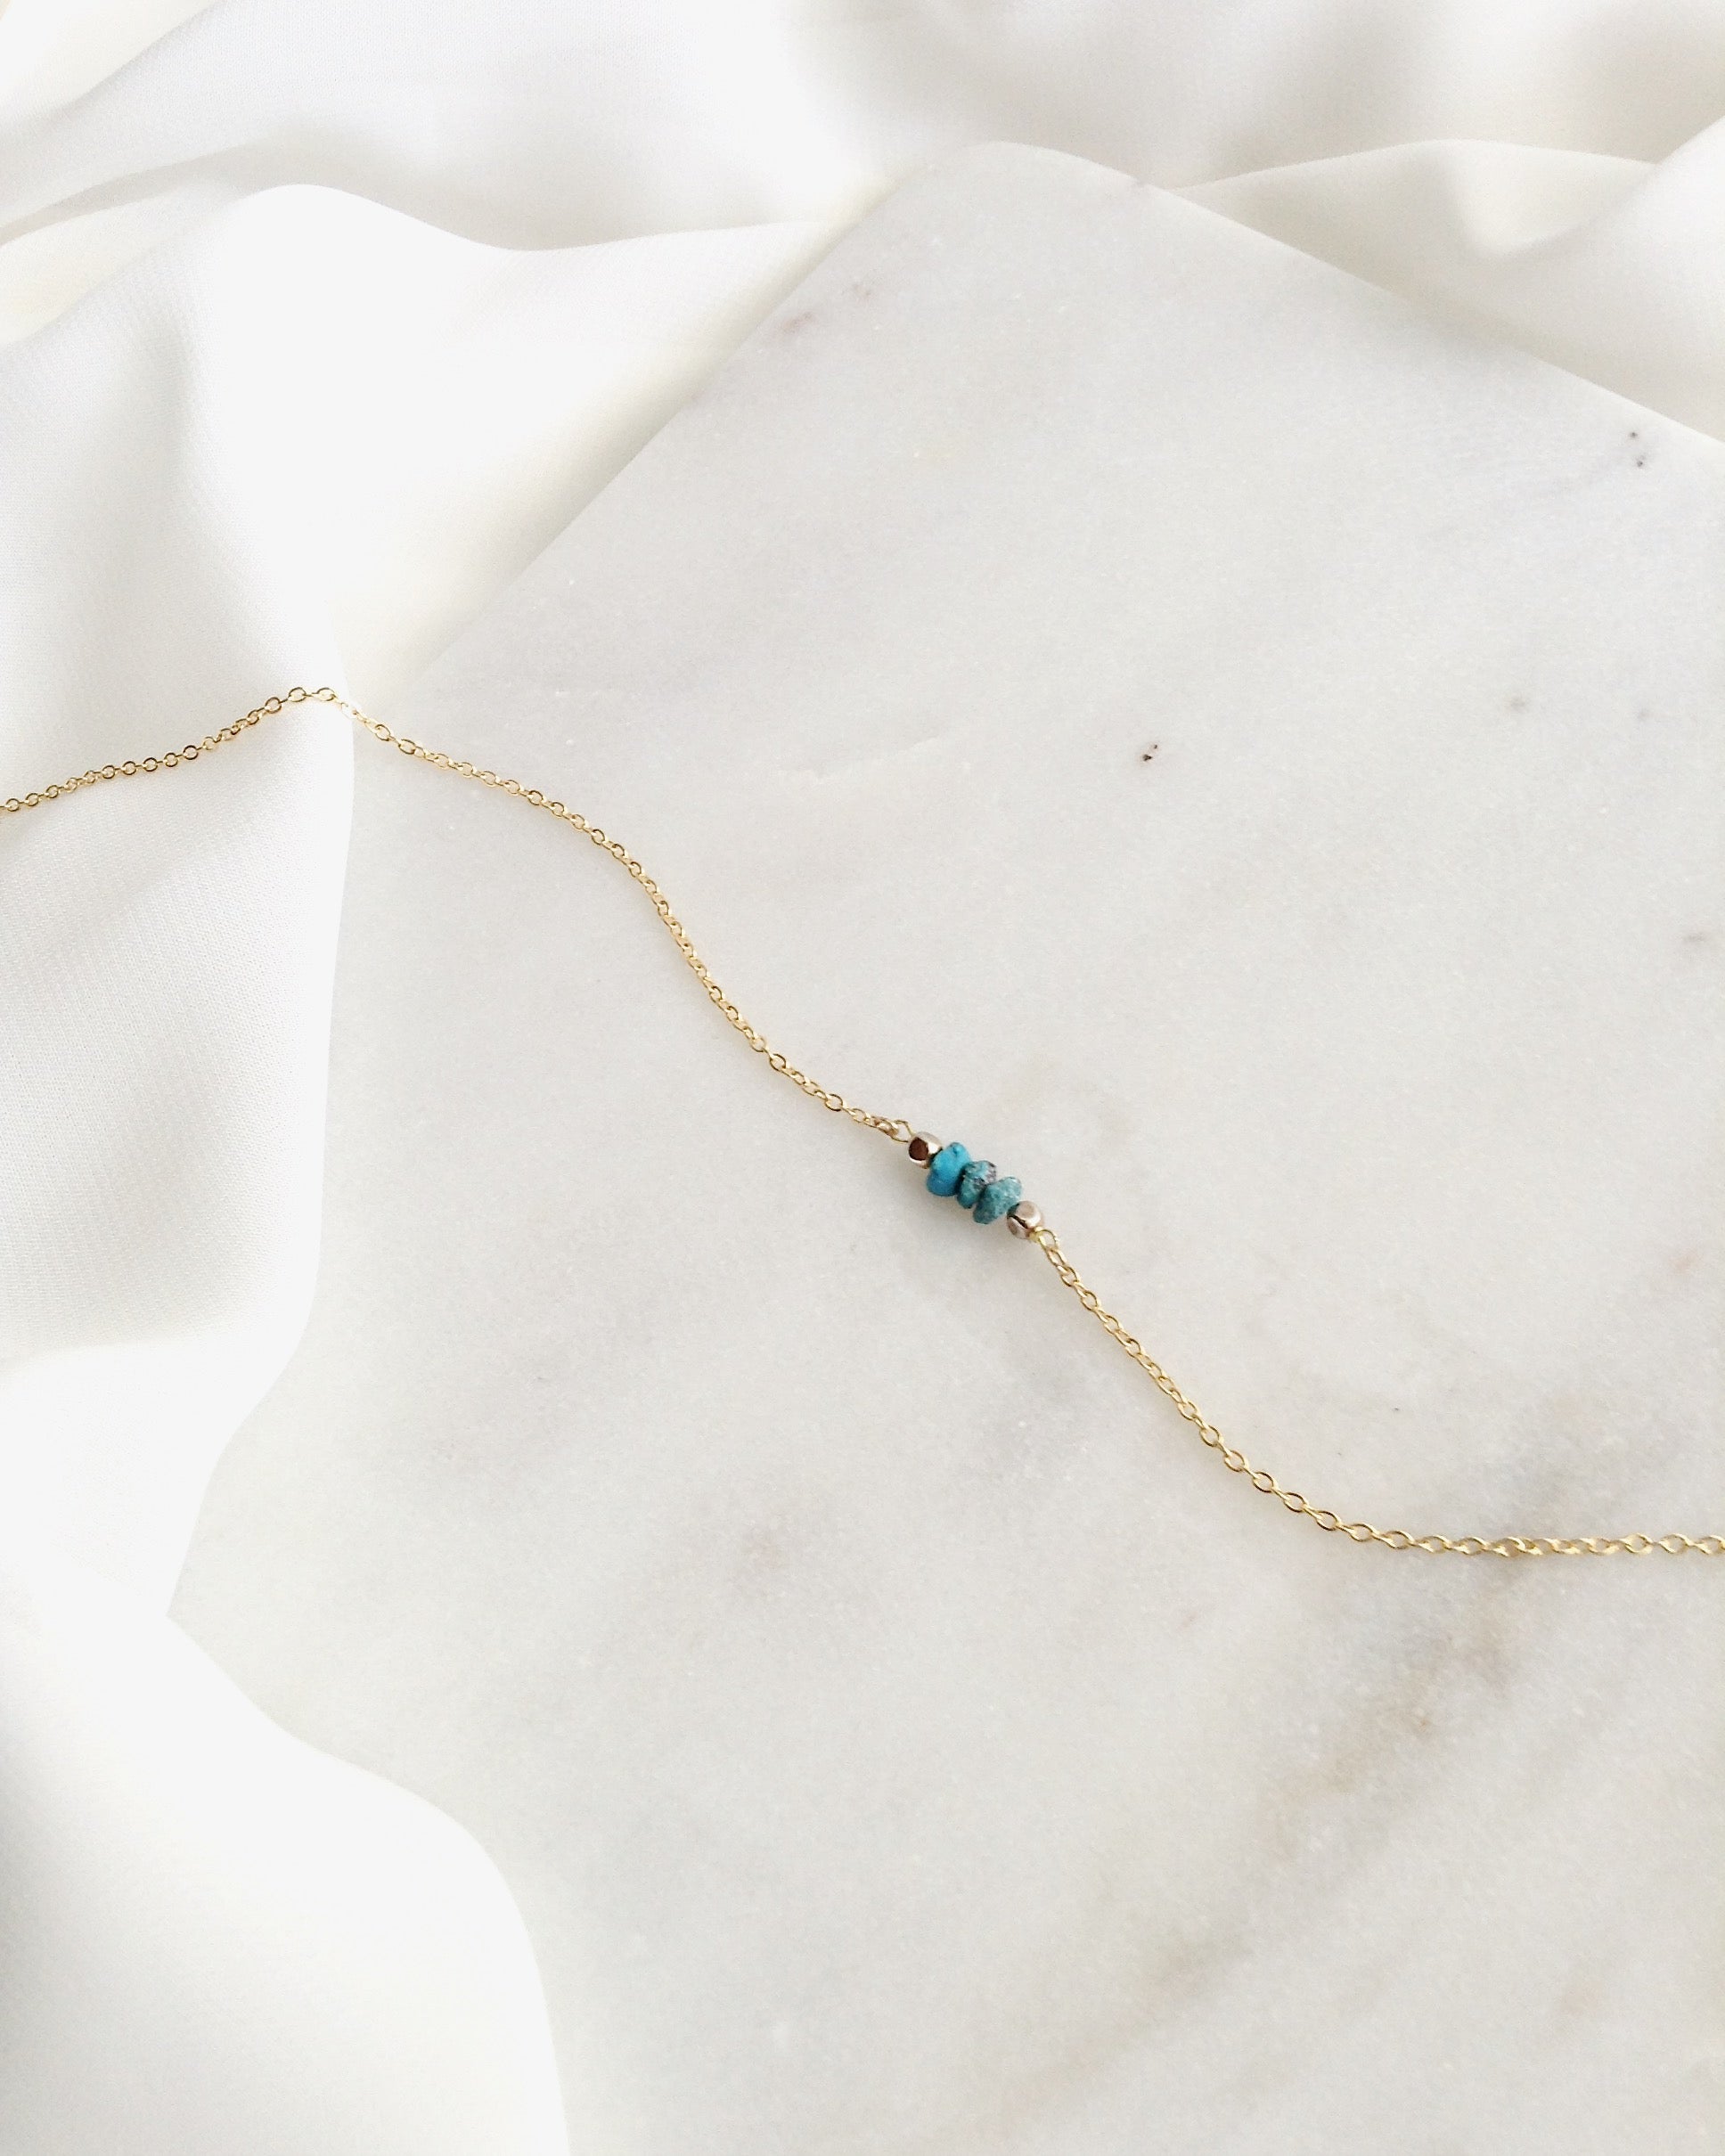 Dainty Turquoise Choker | Simple Choker in Gold Filled or Sterling Silver | IB Jewelry